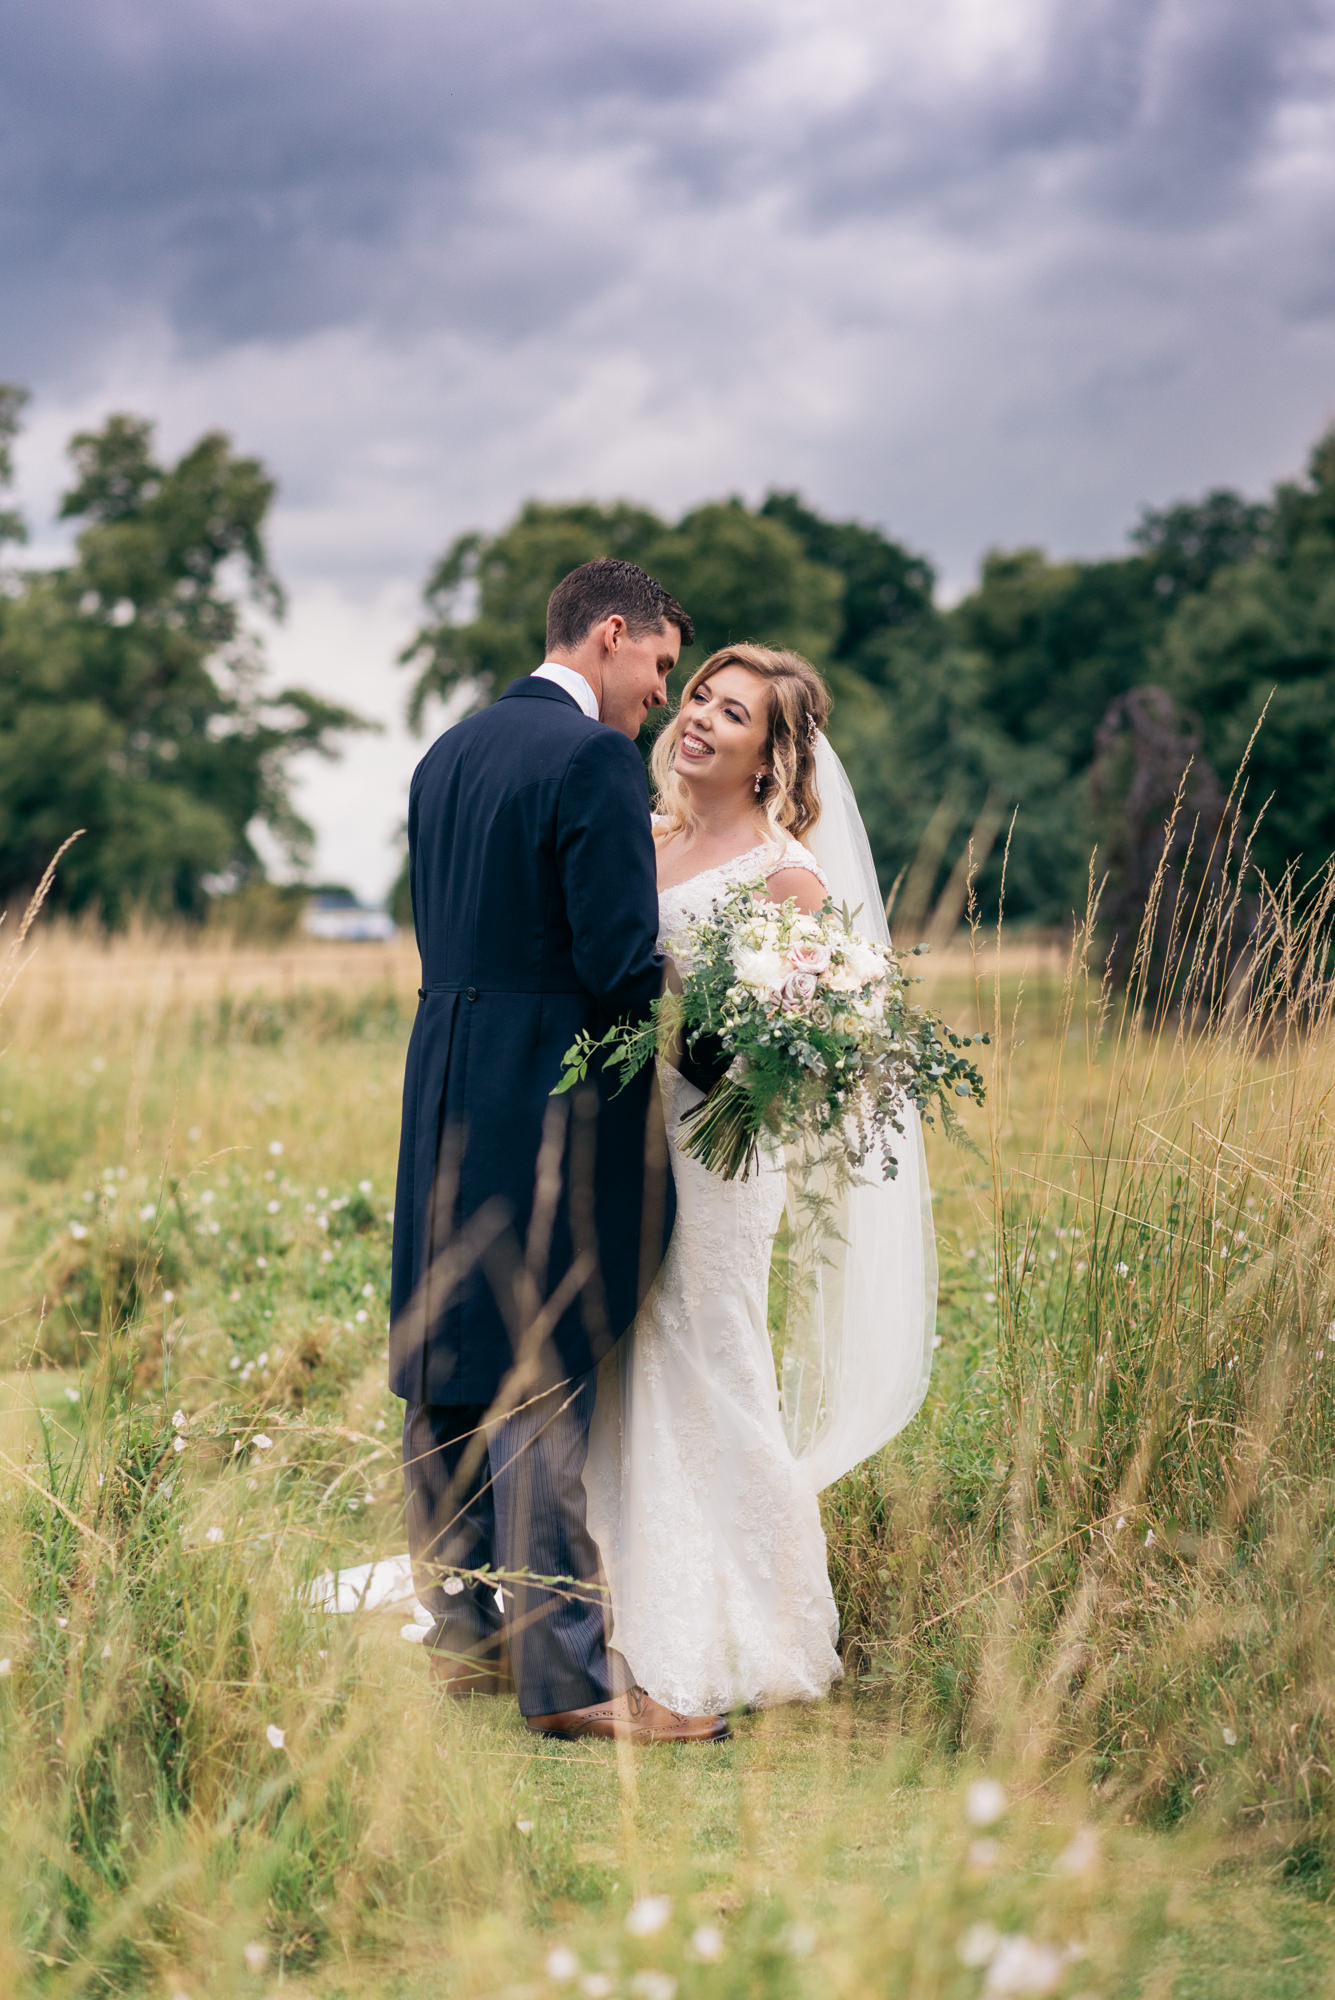 Portrait of the bride and groom at Narborough Hall Gardens in Norfolk